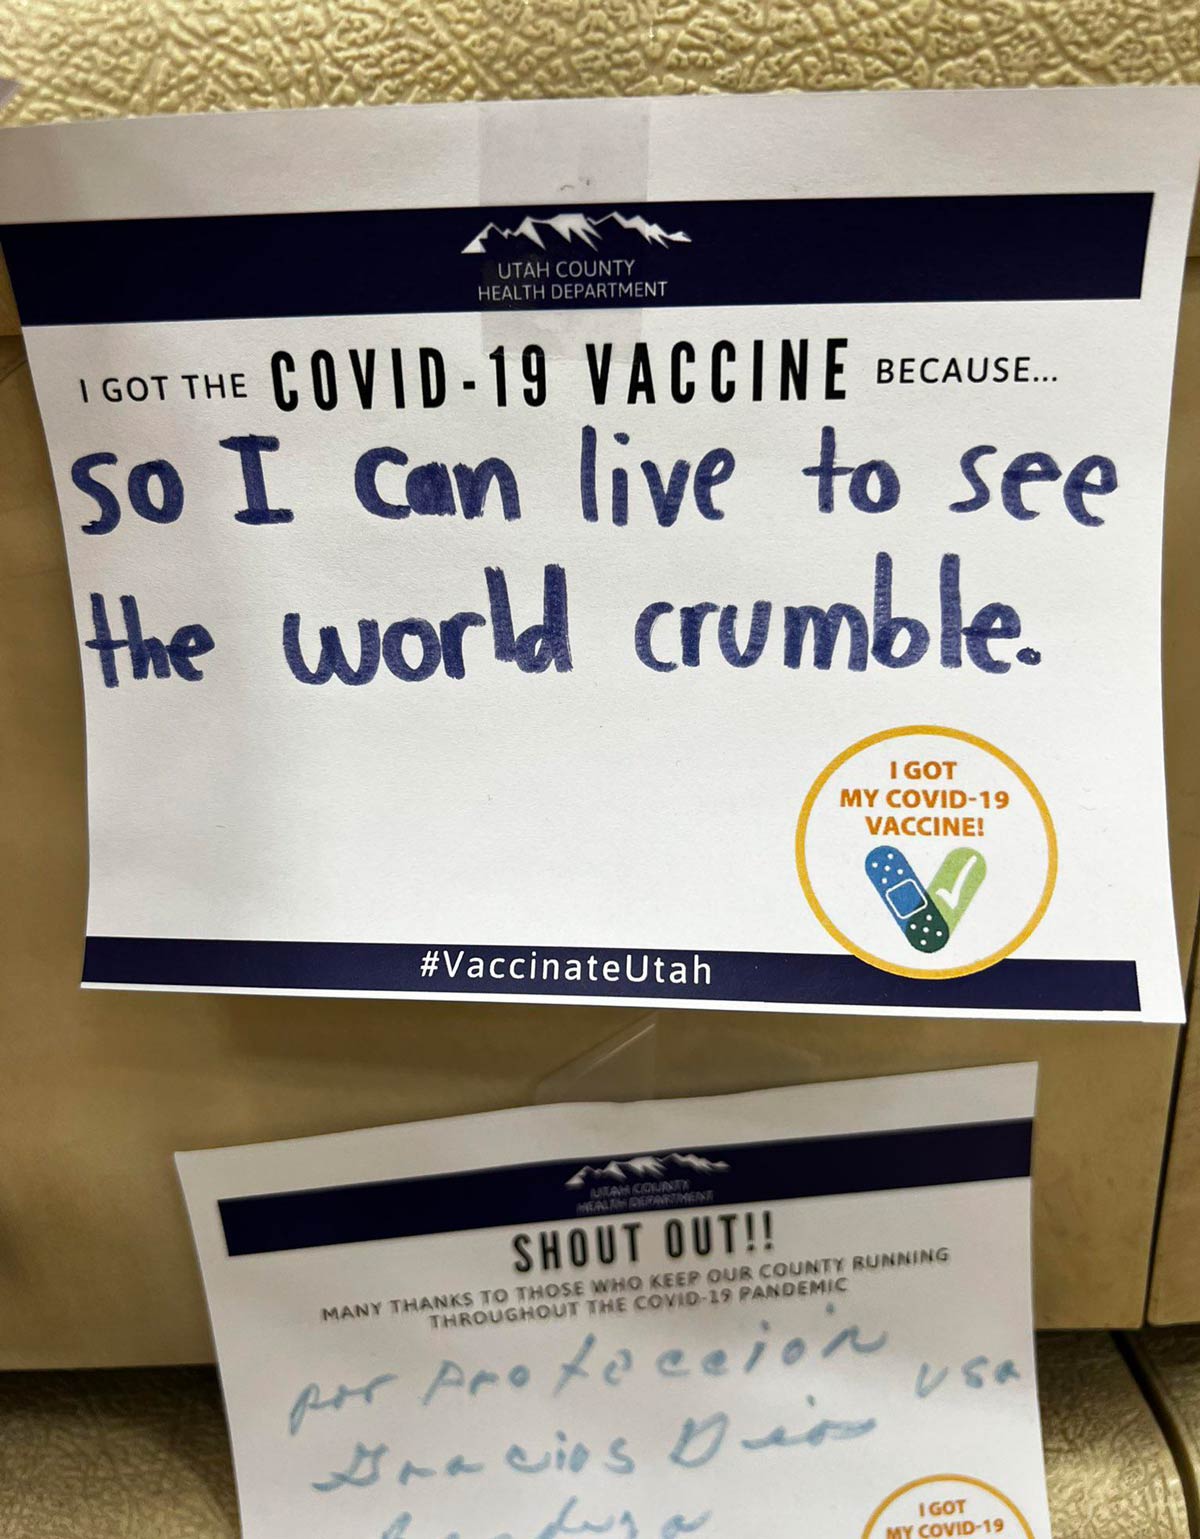 I got the COVID-19 Vaccine because...